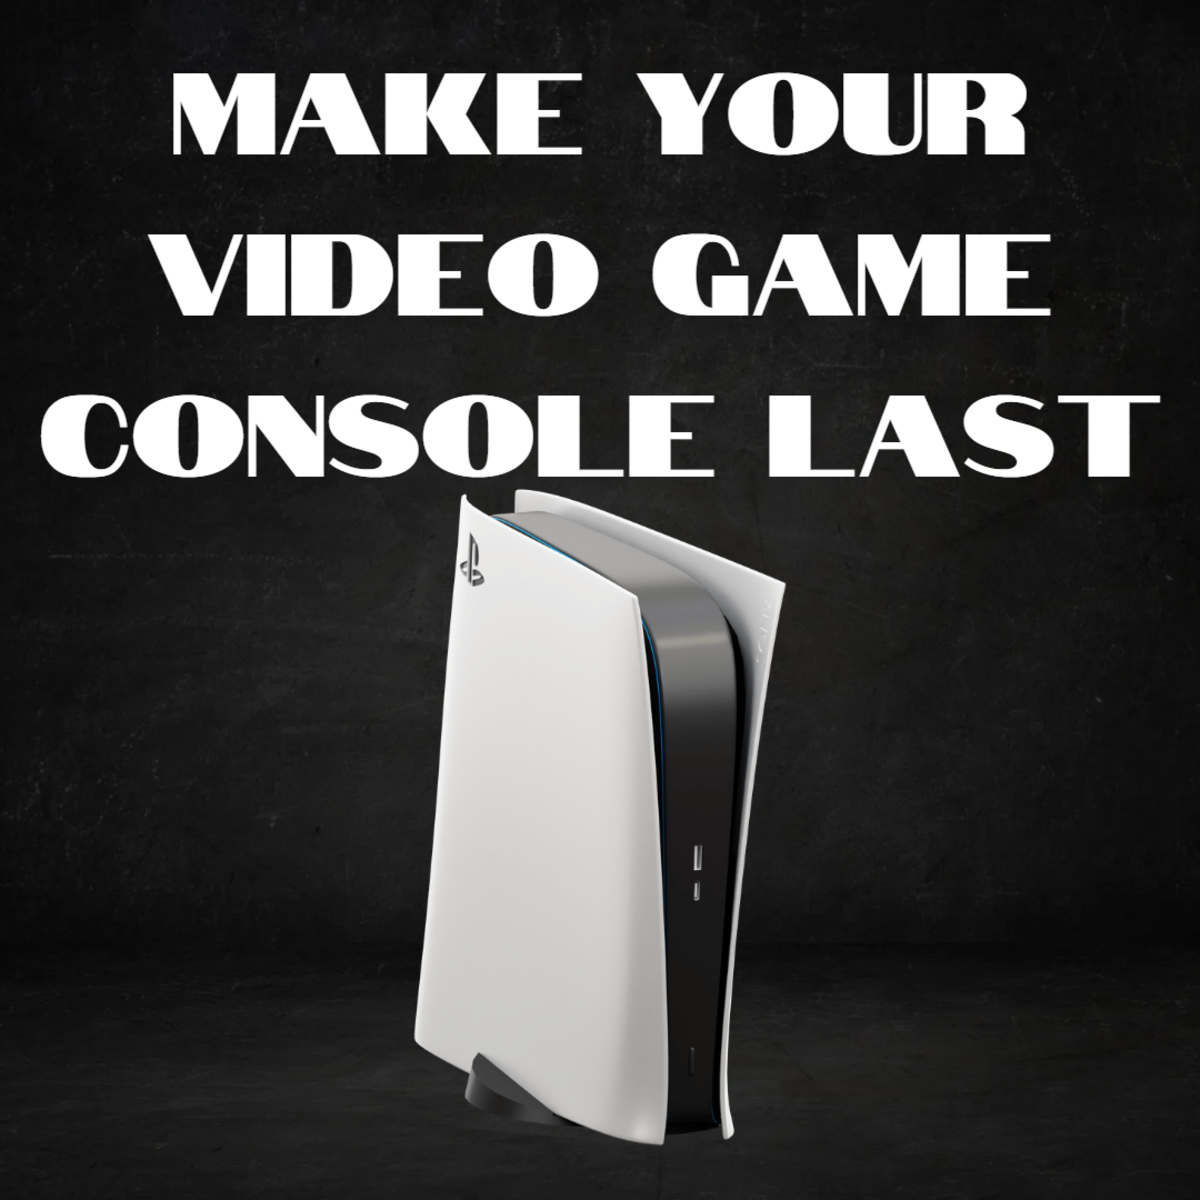 How to Make a Video Game Console Last for Years